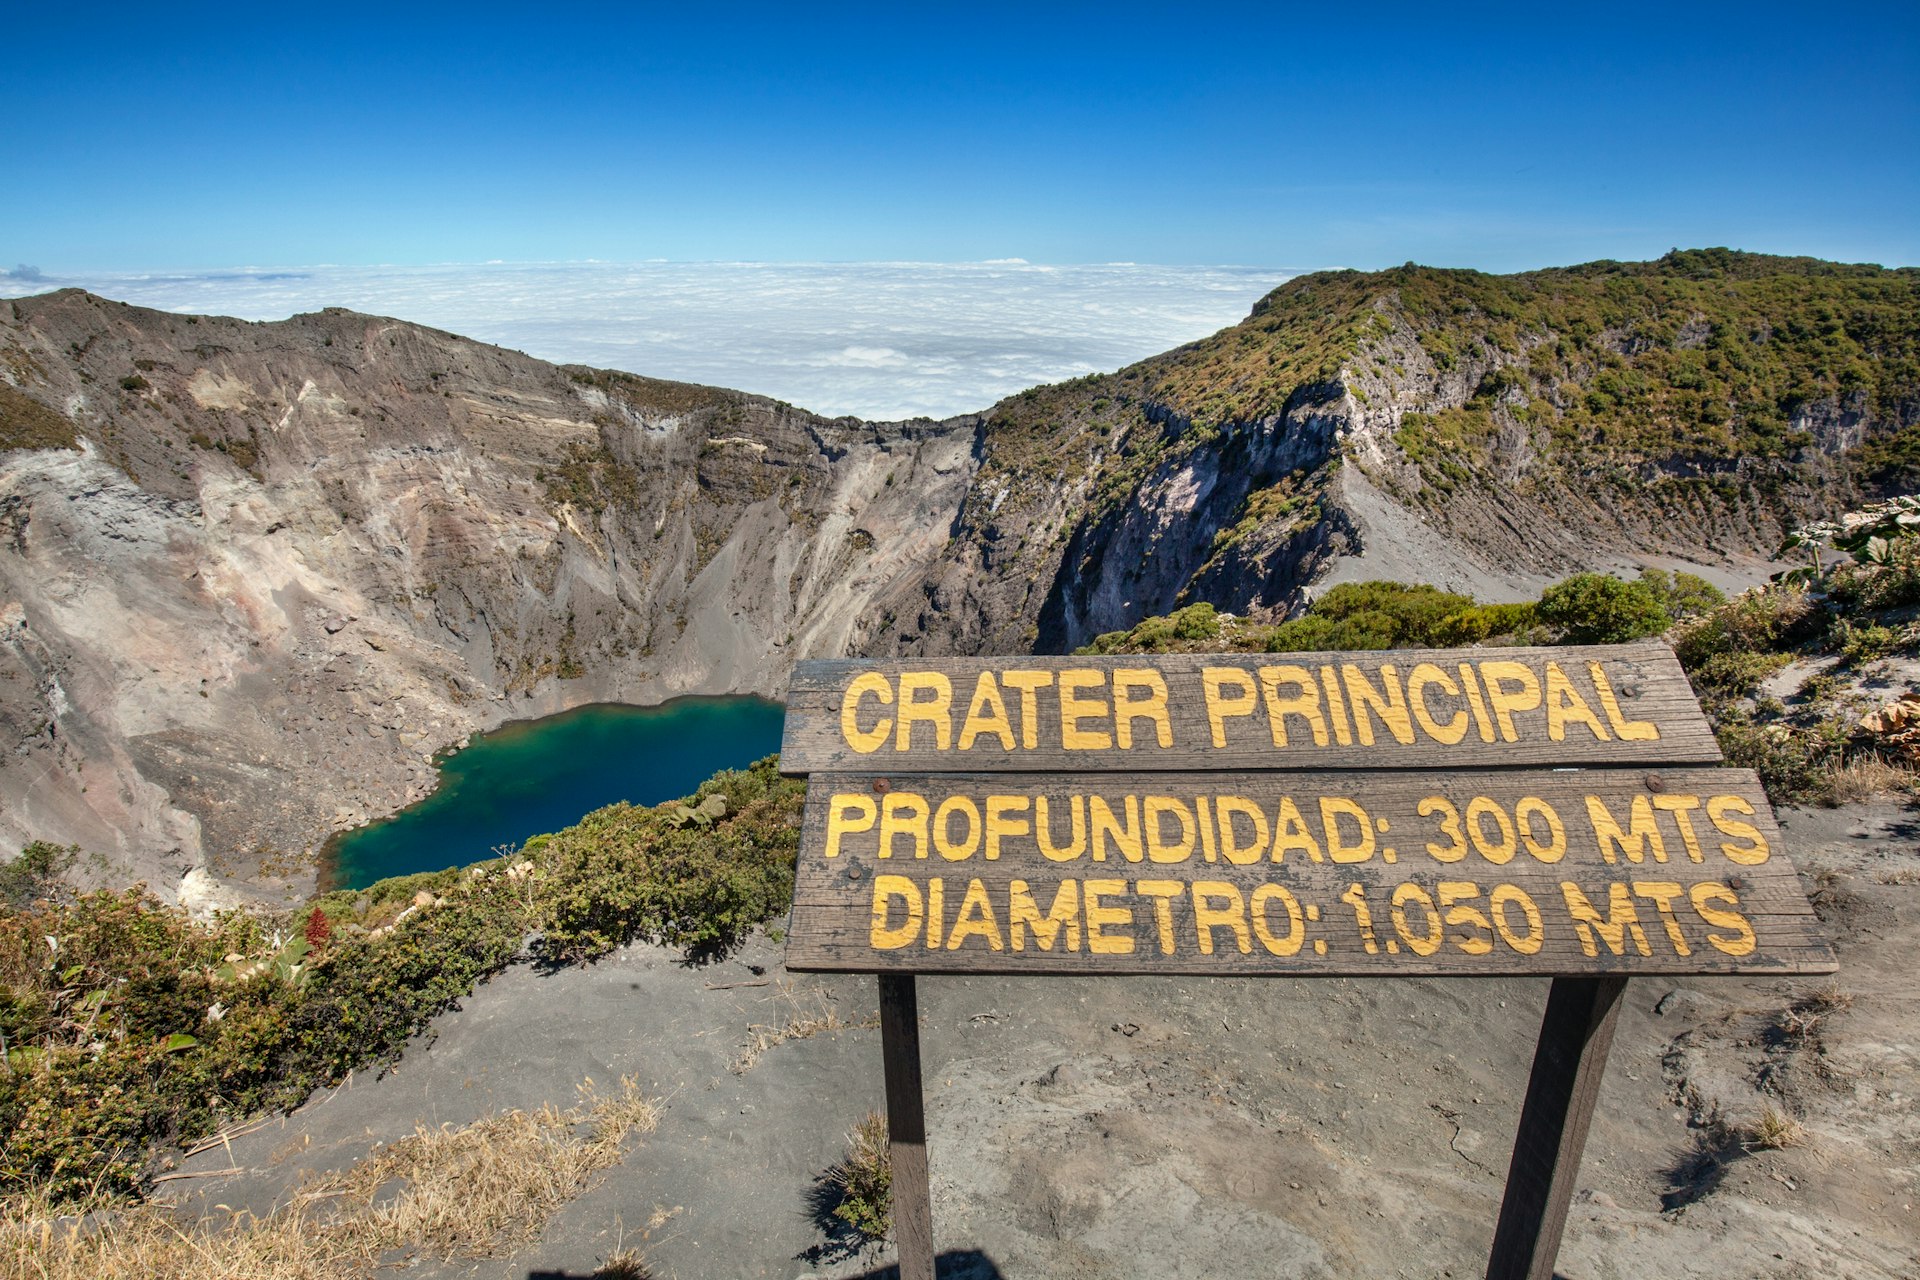 A sign at a volcanic crater filled with blue-green water that says 